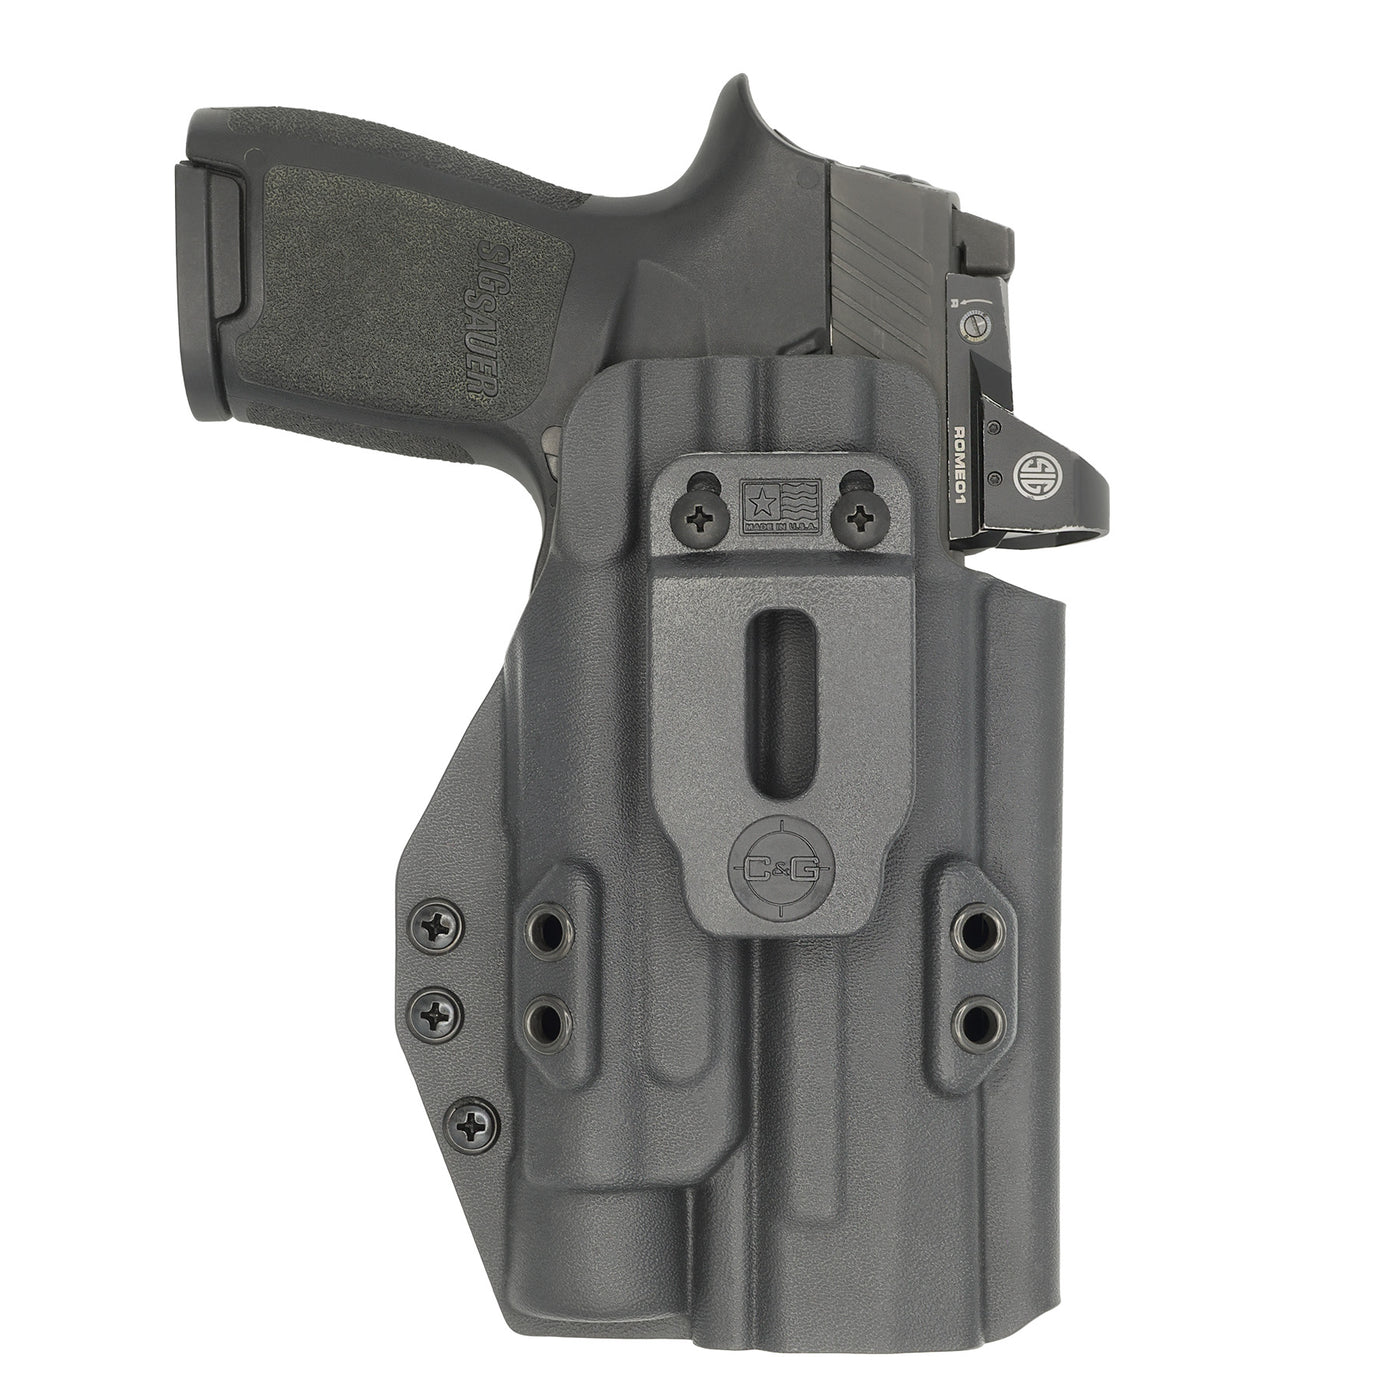 C&G Holsters Custom IWB Tactical IWI Masada Streamlight TLR1 in holstered position